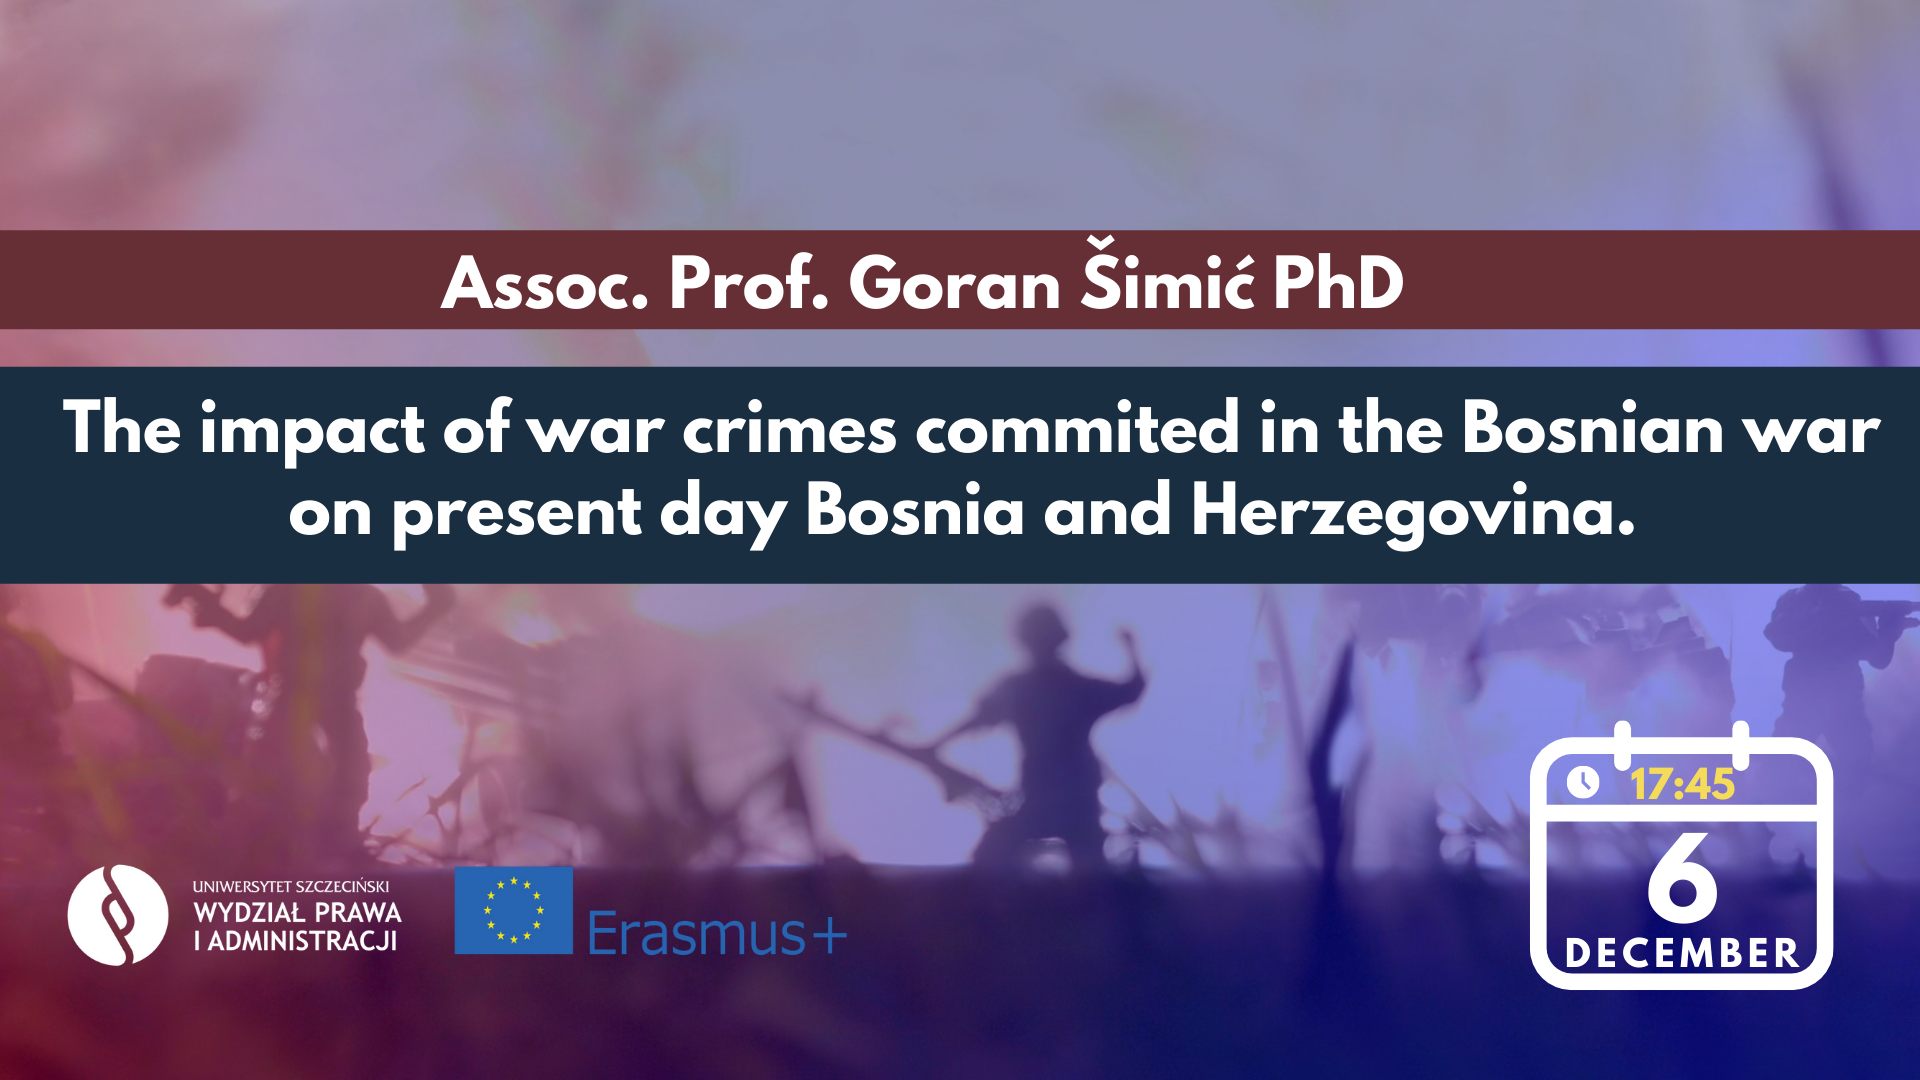 The impact of war crimes commited in the Bosnian war on present day Bosnia and Herzegovina